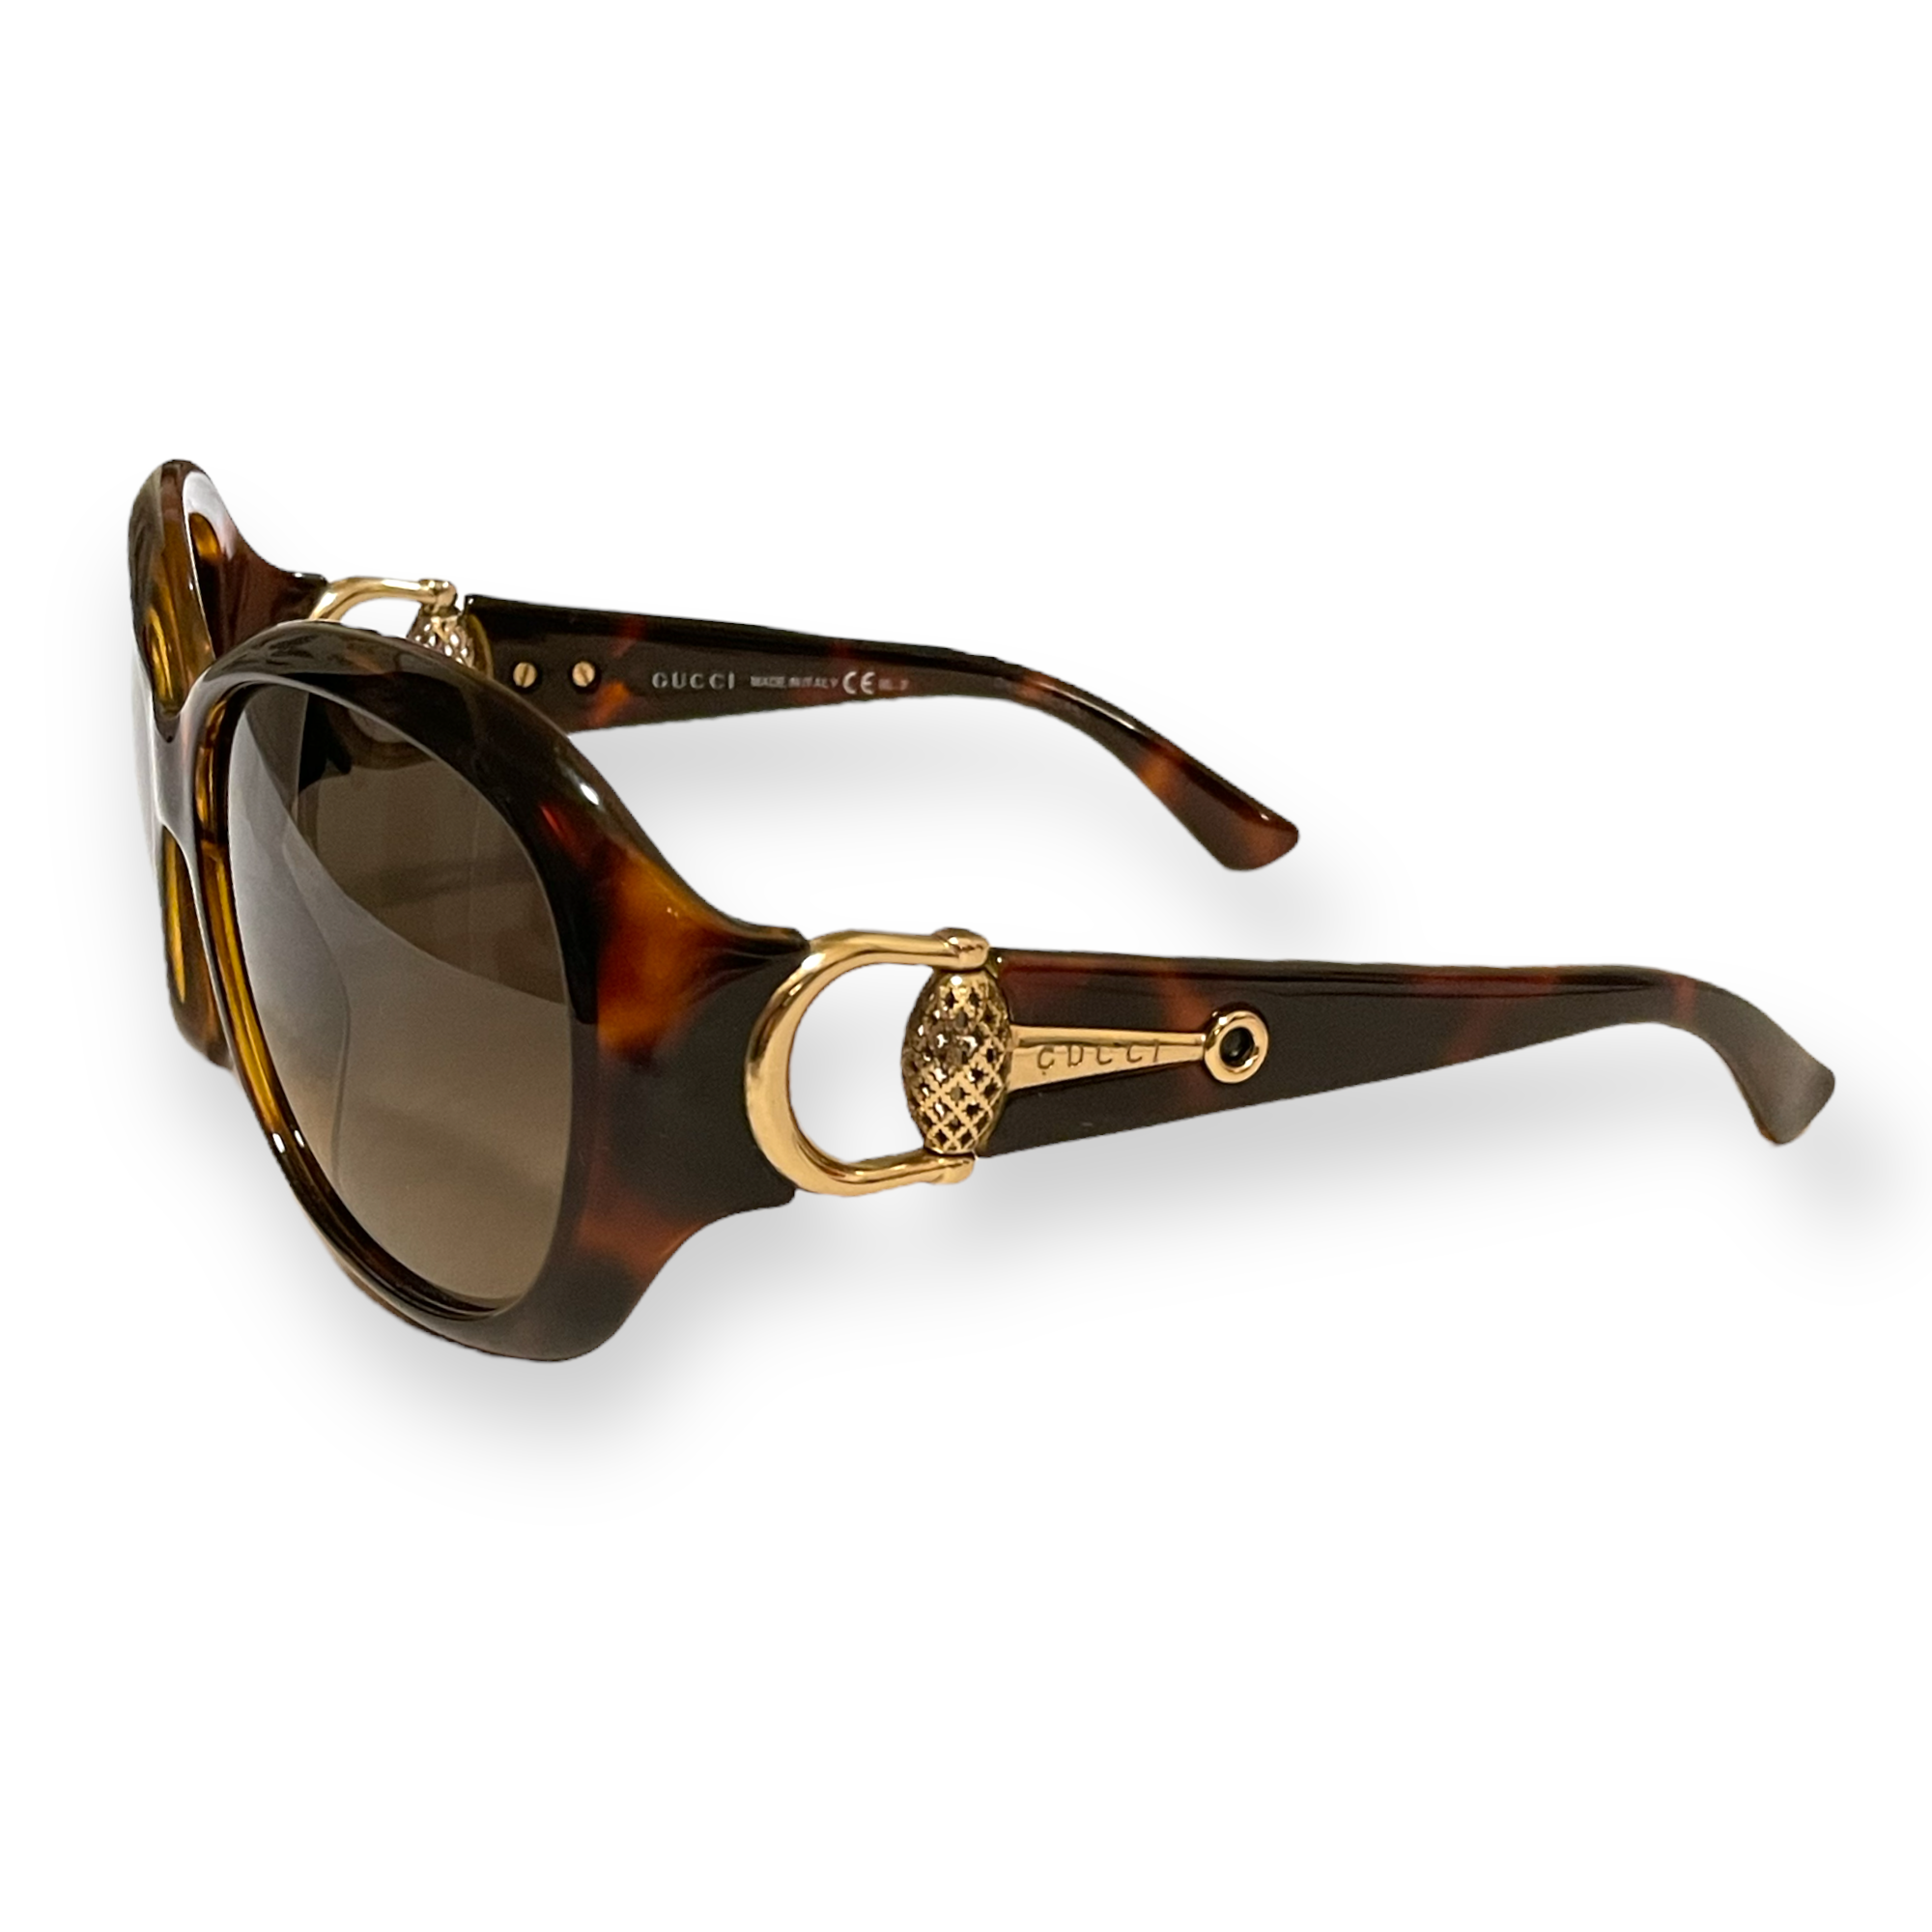 Oversized GUCCI Tortoise Frames with classic gold tone Horse-bit Design